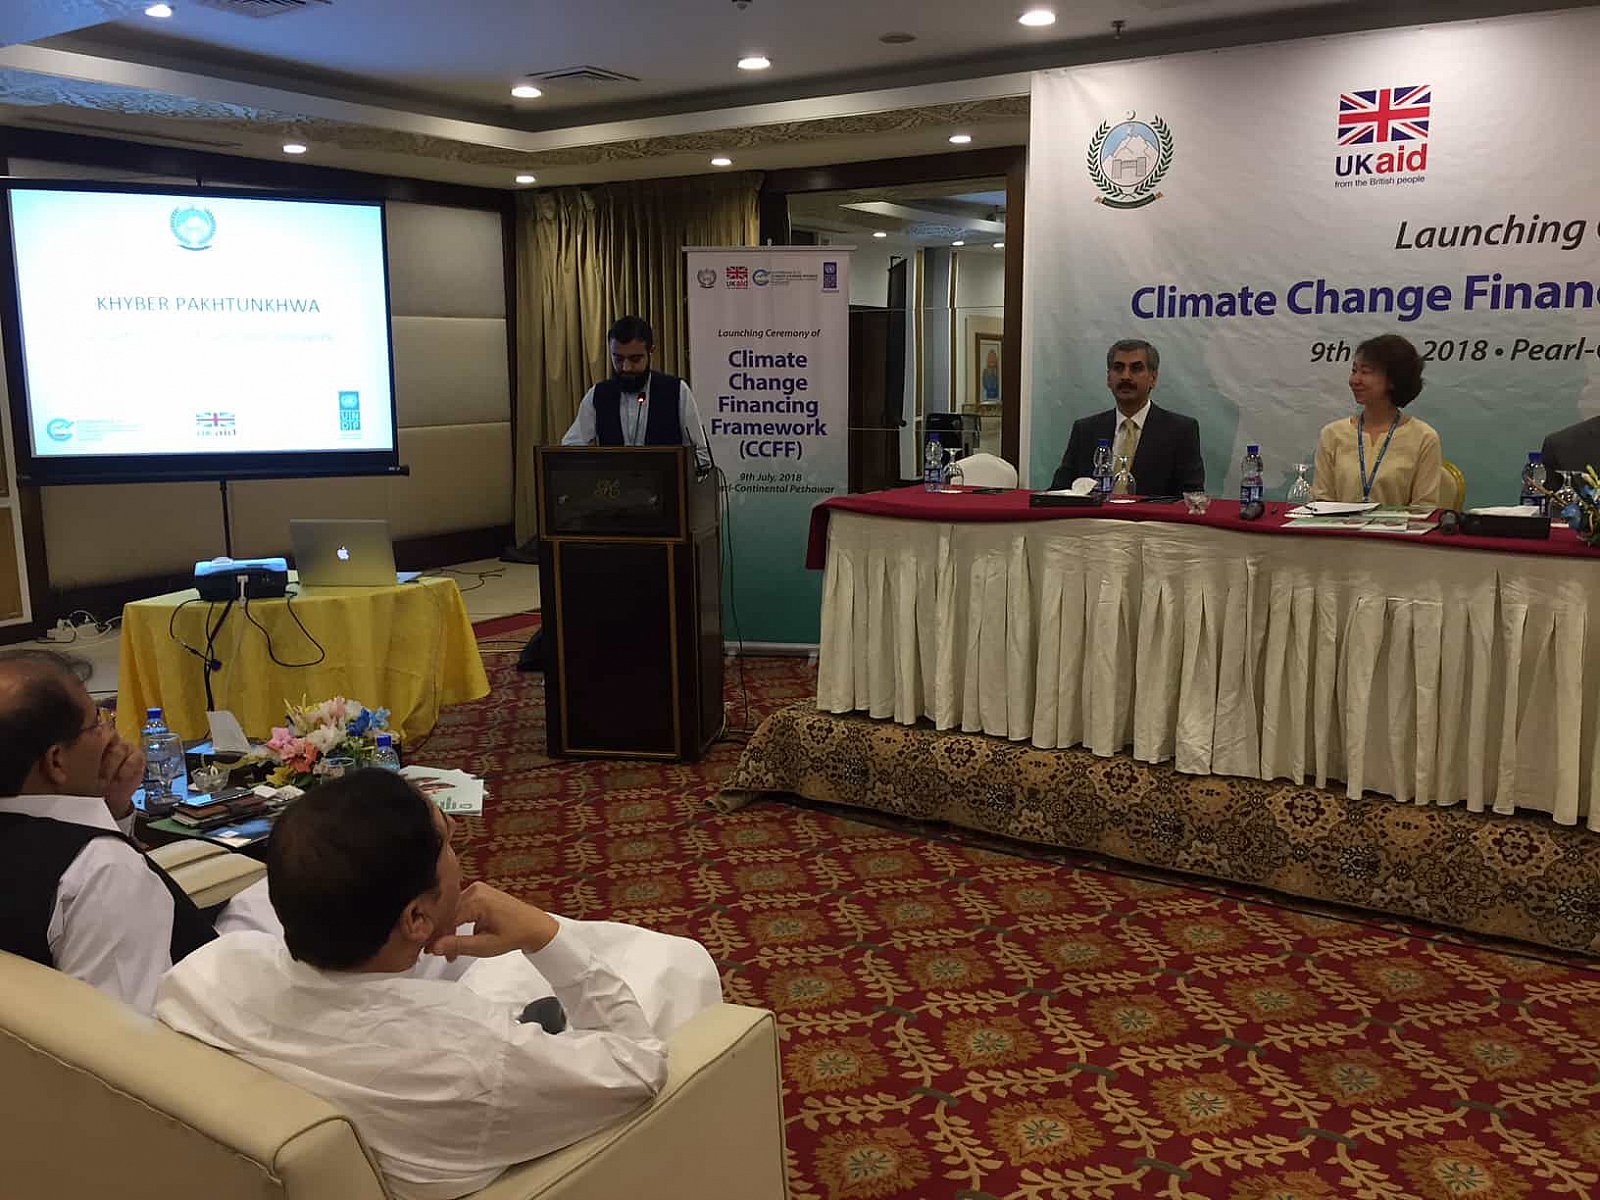 Launching Ceremony of Climate Change Finance Framework(CCF), 9 July 2018